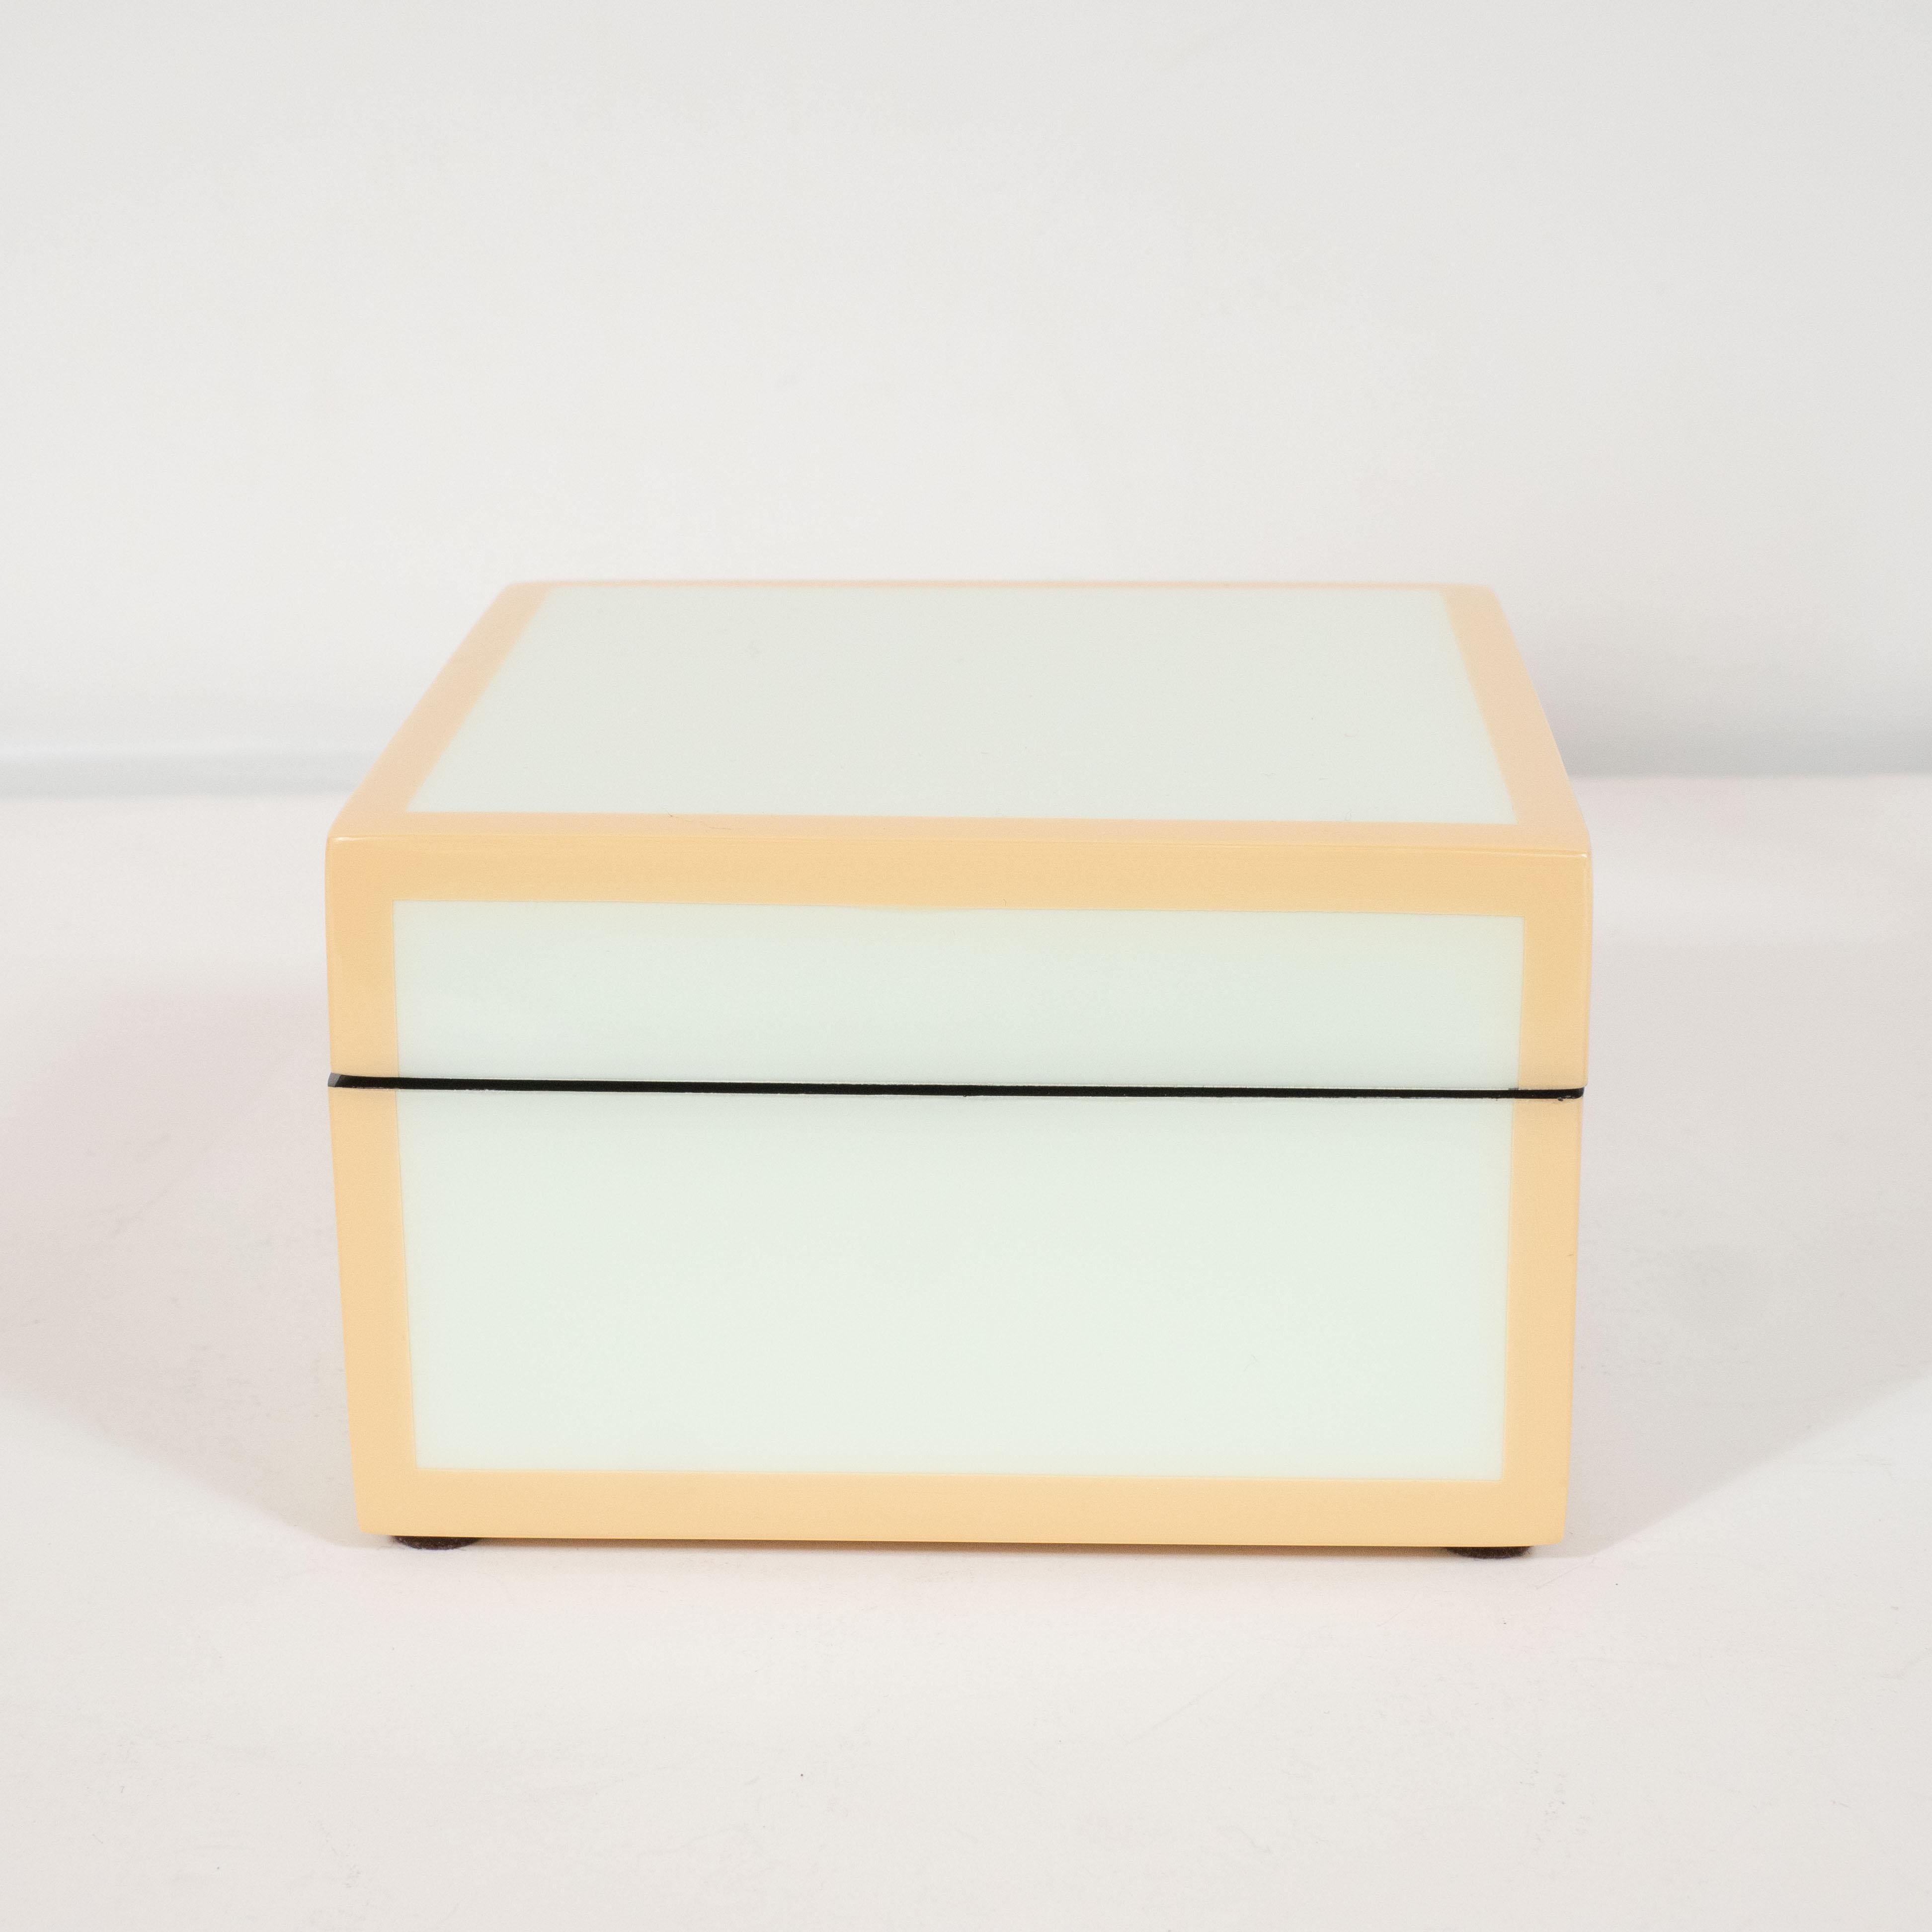 Modernist Square Lacquered Square Box in Pale Celadon with Tan Accents 1